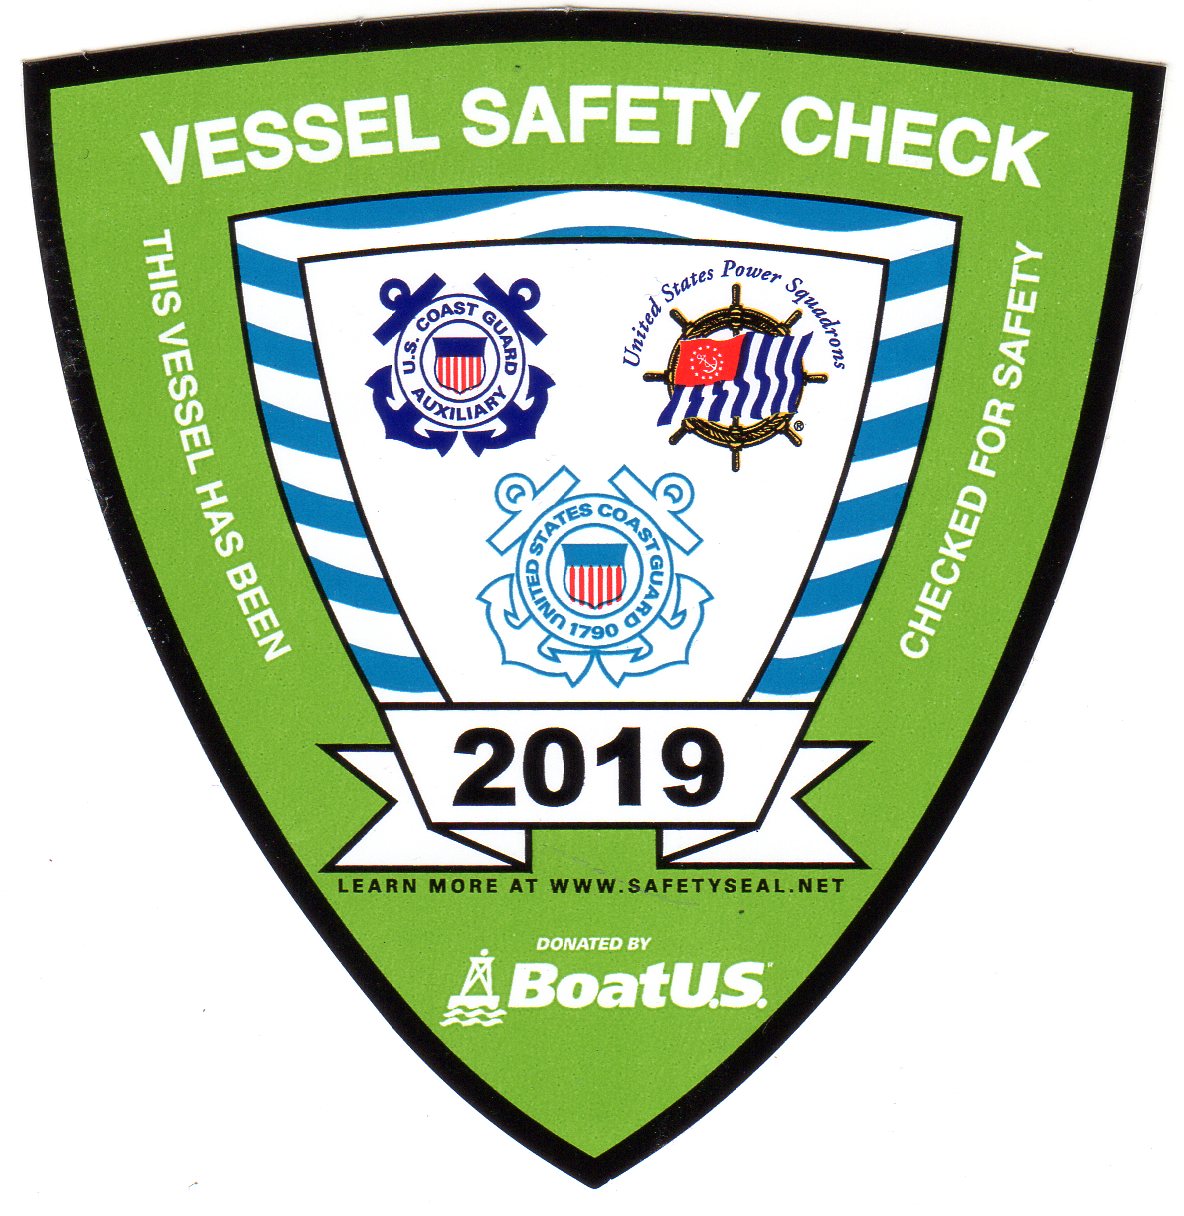 This is a picture of the Vessel Safety Check sticker issued under the auspices of the U S Coast Guard, U S Coast Guard Auxiliary and the United States Power Squadrons. The sticker is issued and meant to be displayed on your boat if you successfully pass an inspection.